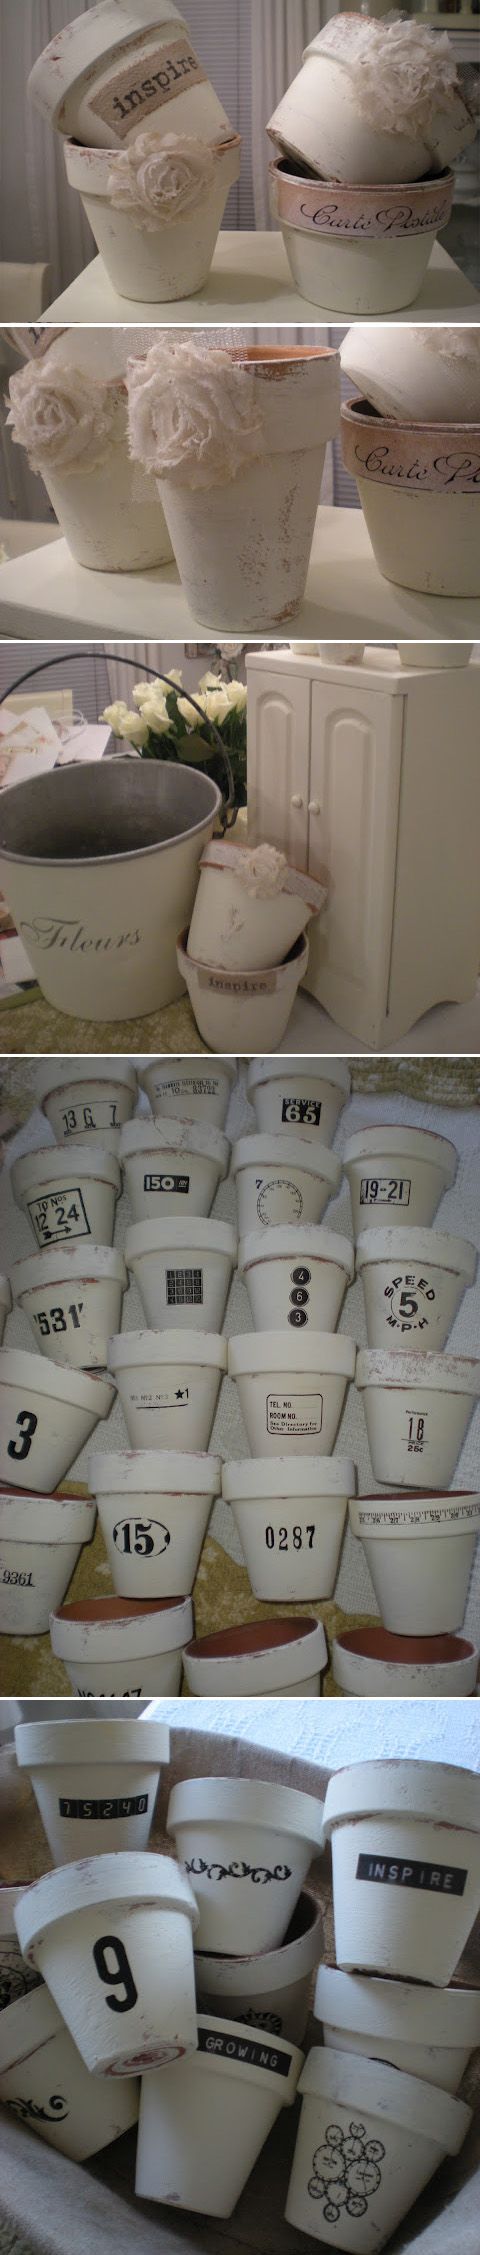 White Chalk Paint Terra Cotta Pots to Add Some Shabby Chic Style. 